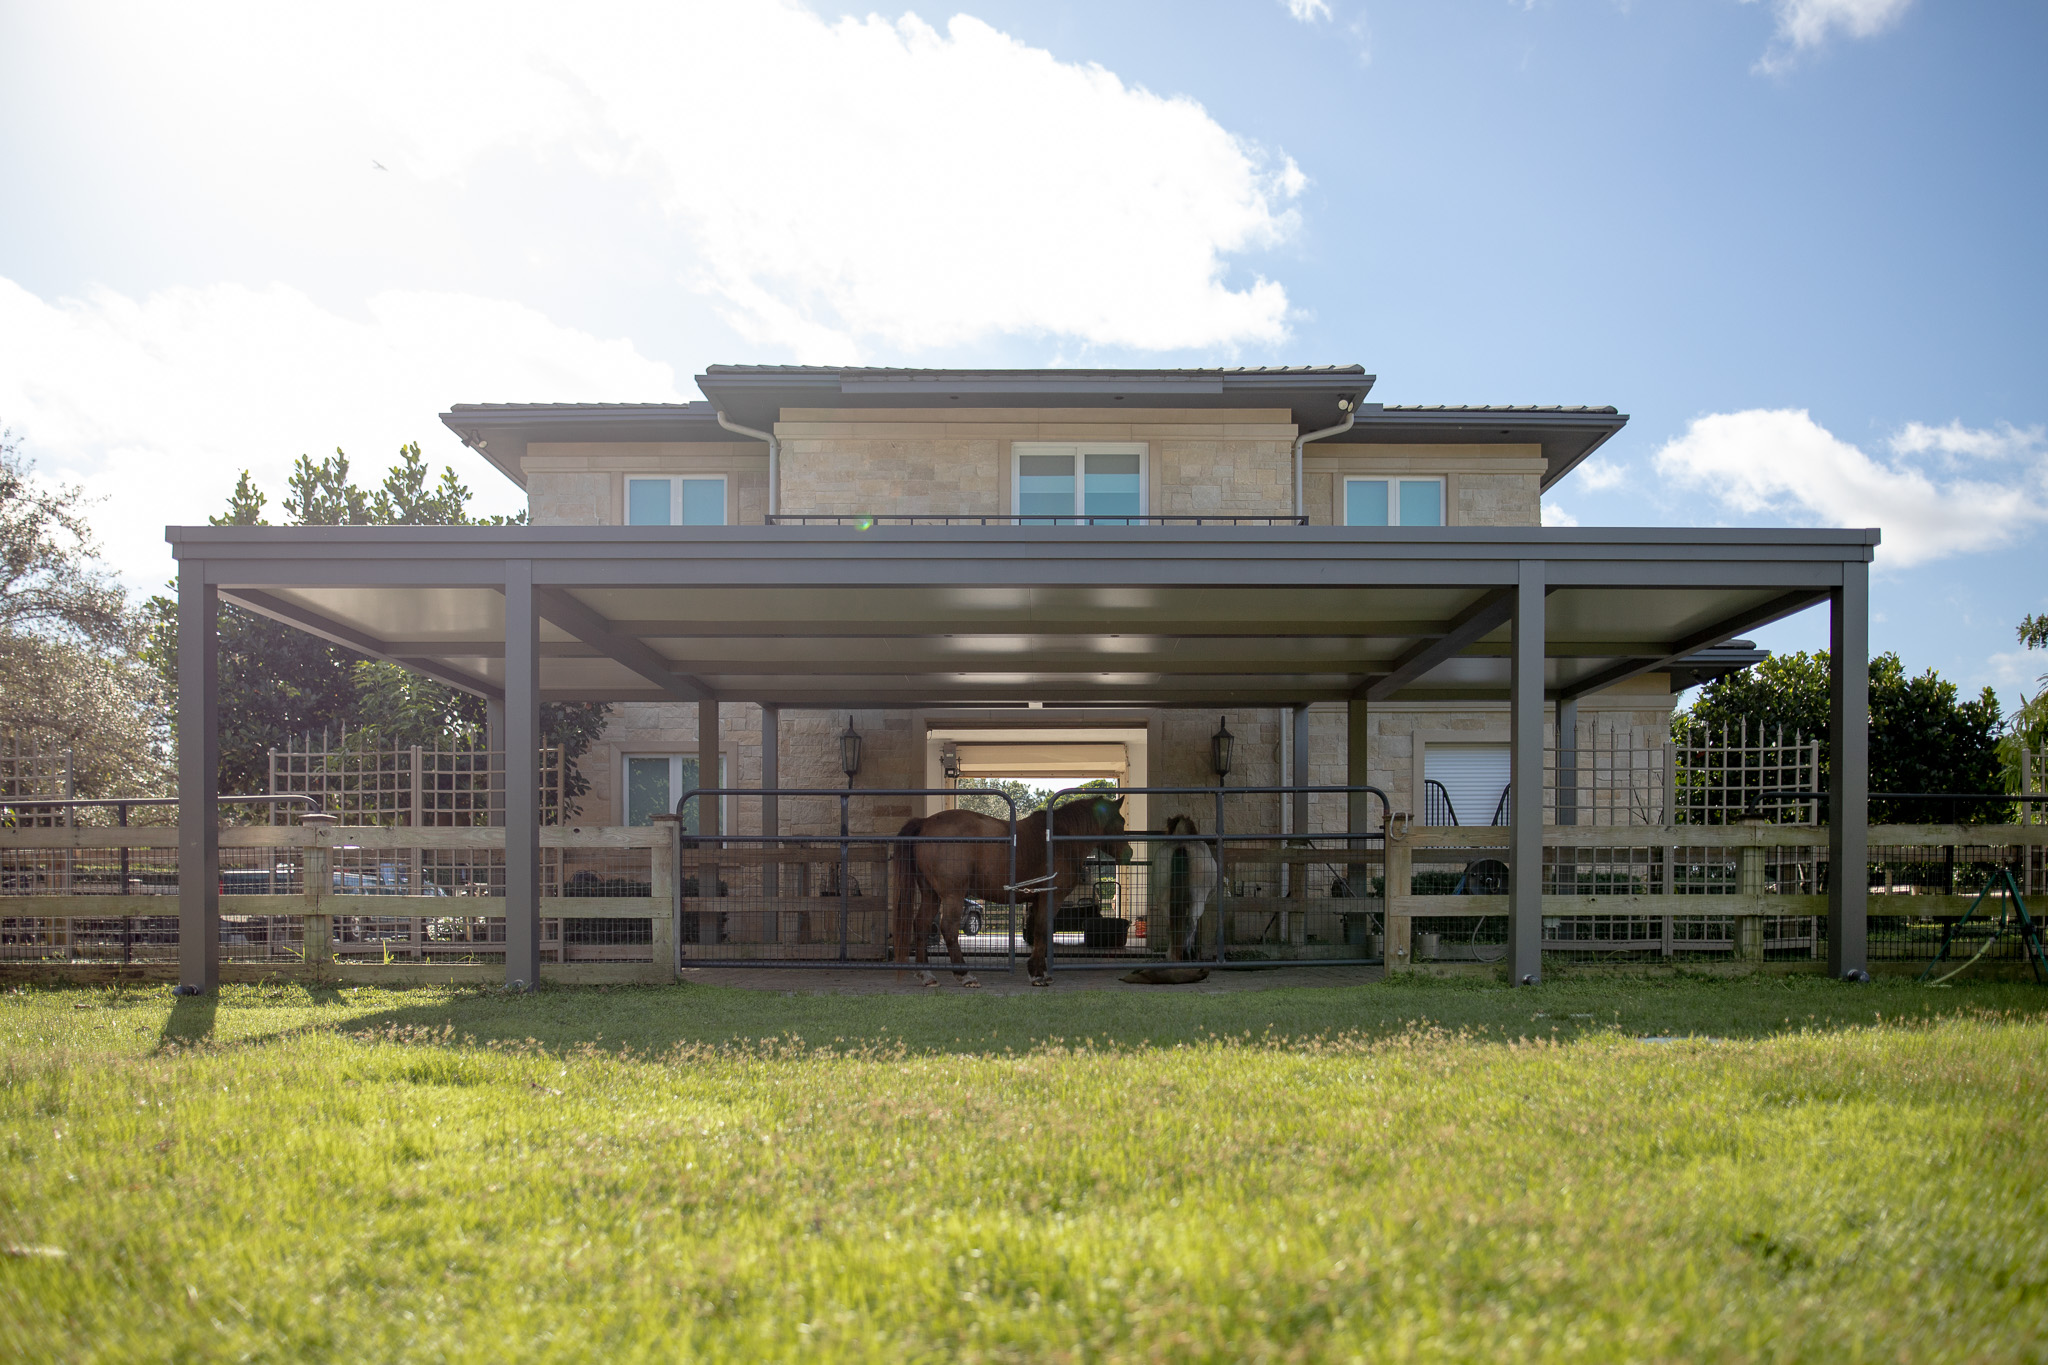 Automated Louvered Pergolas Provide Shade on Demand and Rain Protection by Sensors